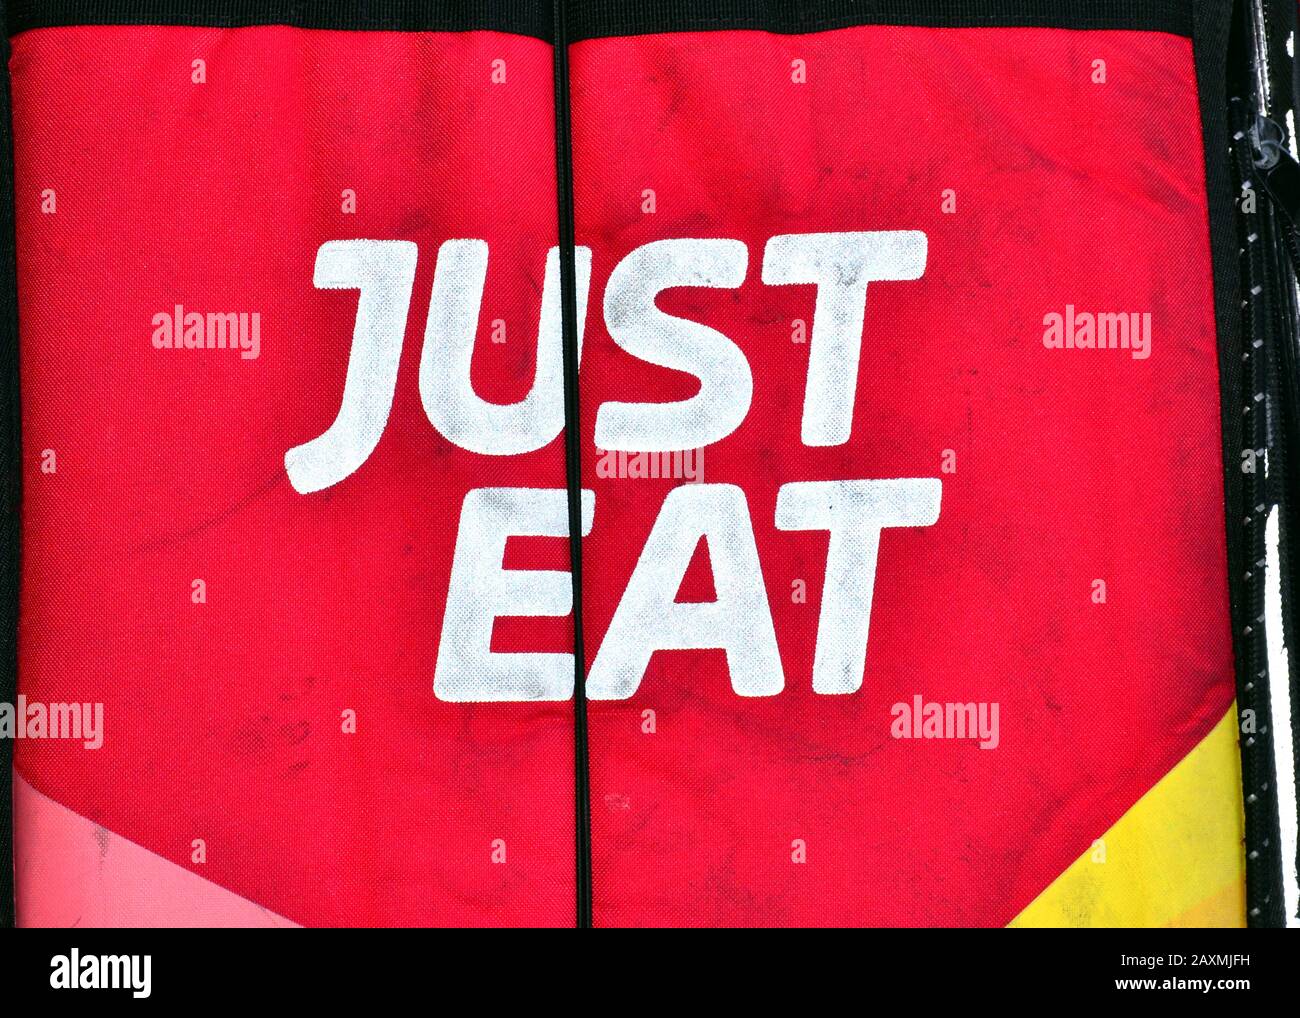 A 'Just Eat' logo on the side of a delivery box in Manchester, uk. Just Eat plc is a British online food order and delivery service. Stock Photo